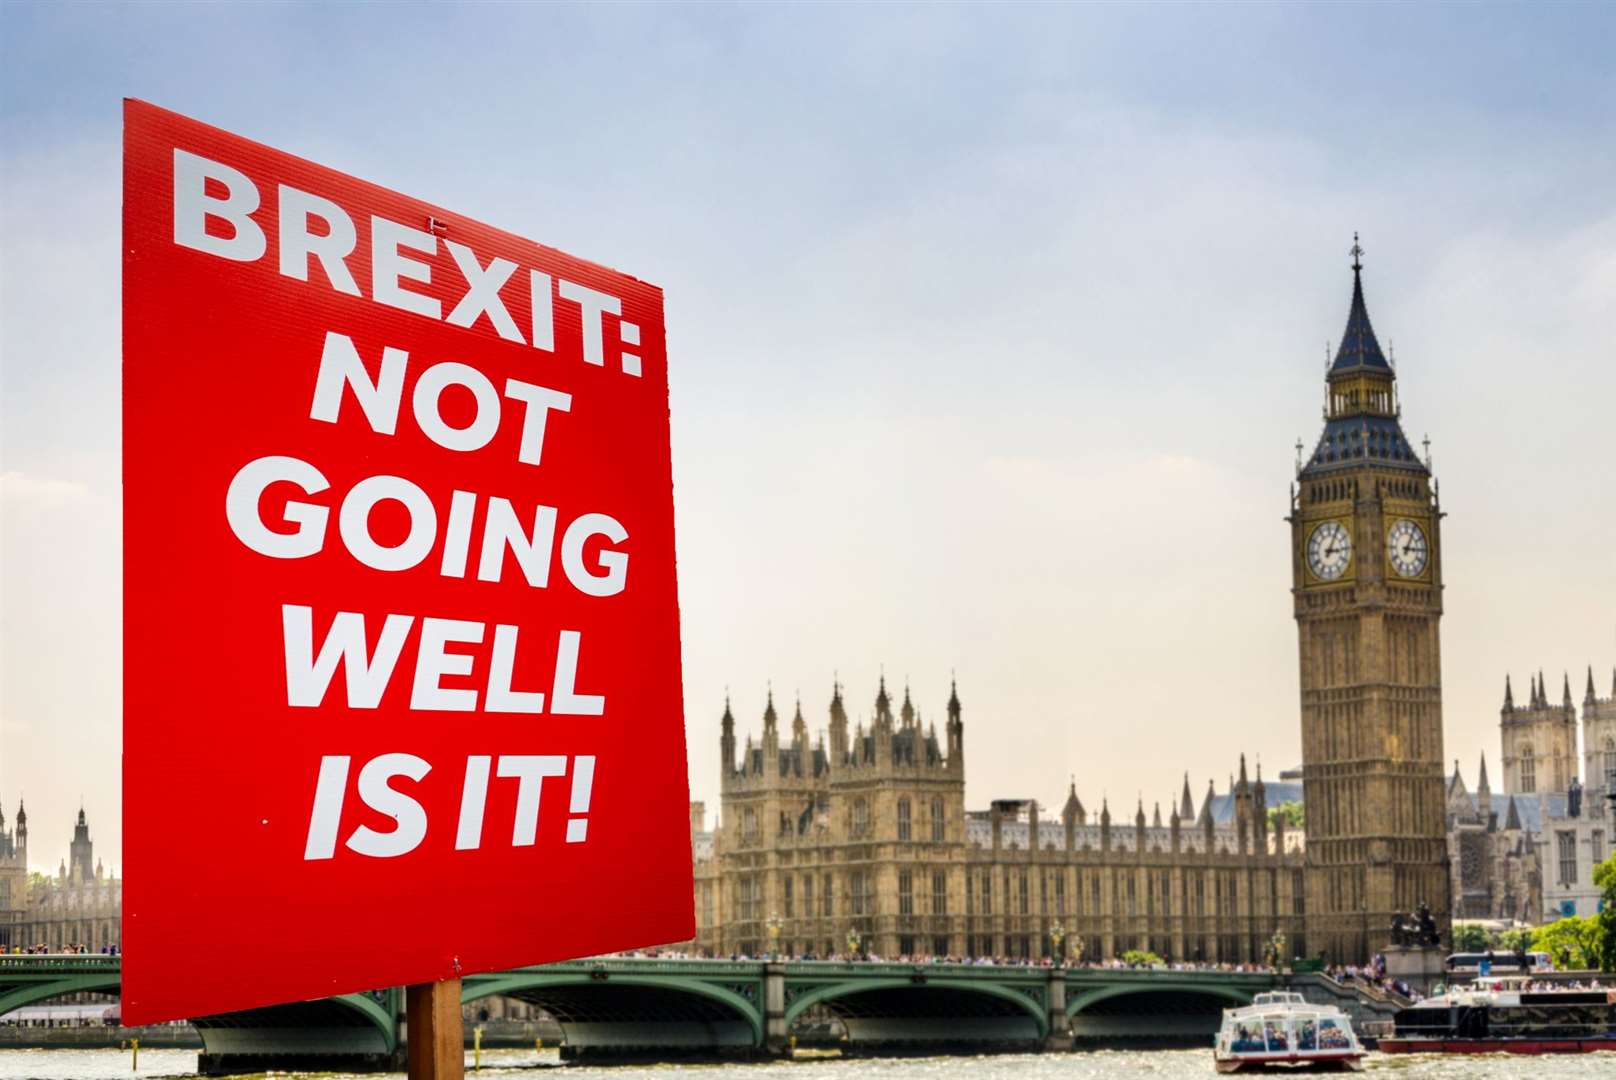 Has Brexit delivered? Picture: istock